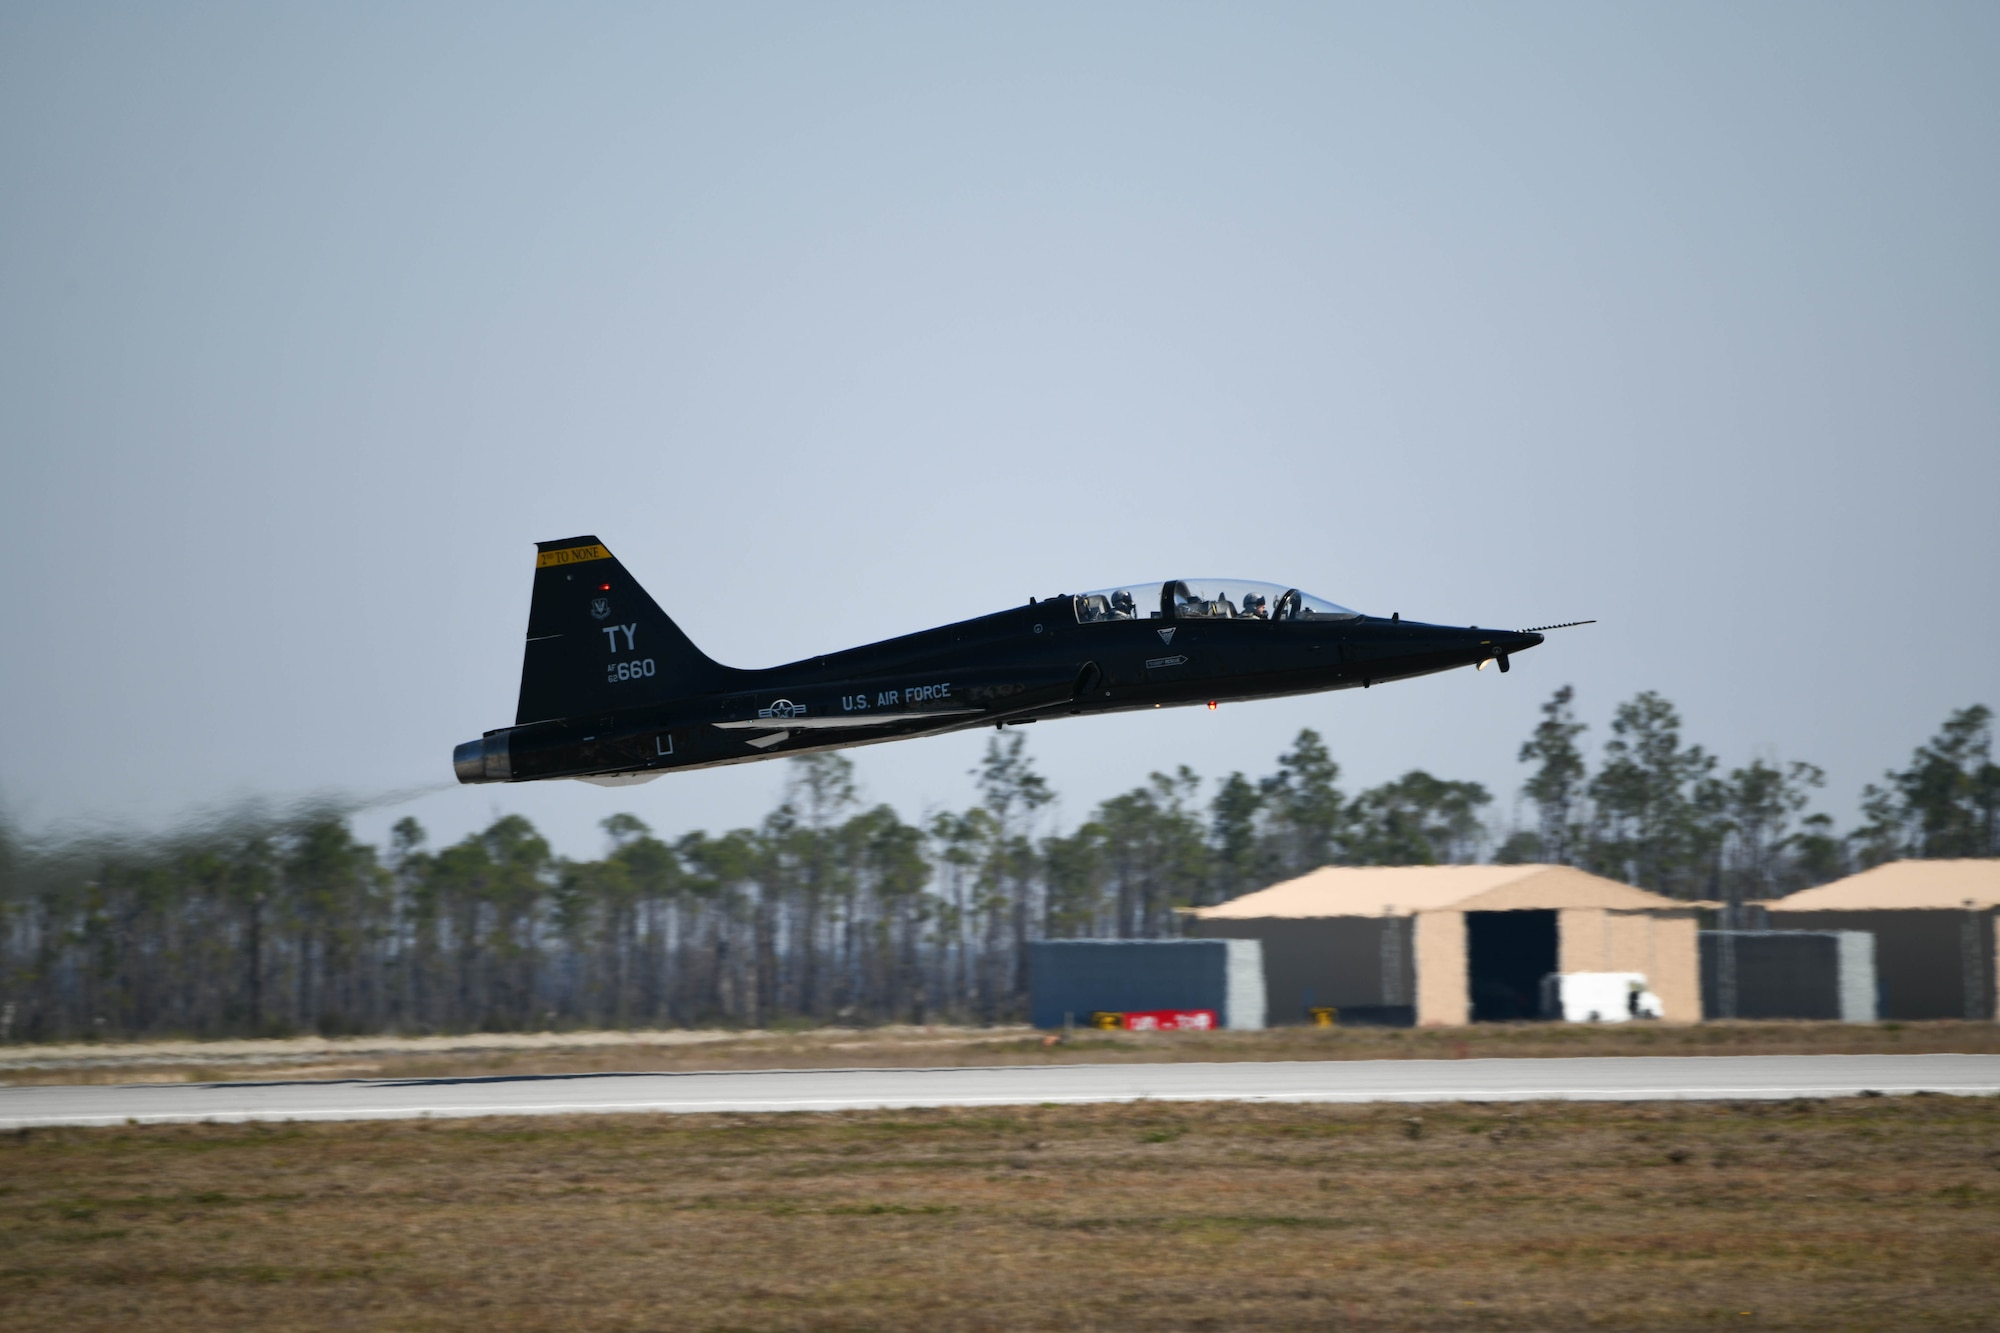 A T-38 Talon takes off from Tyndall Air Force Base